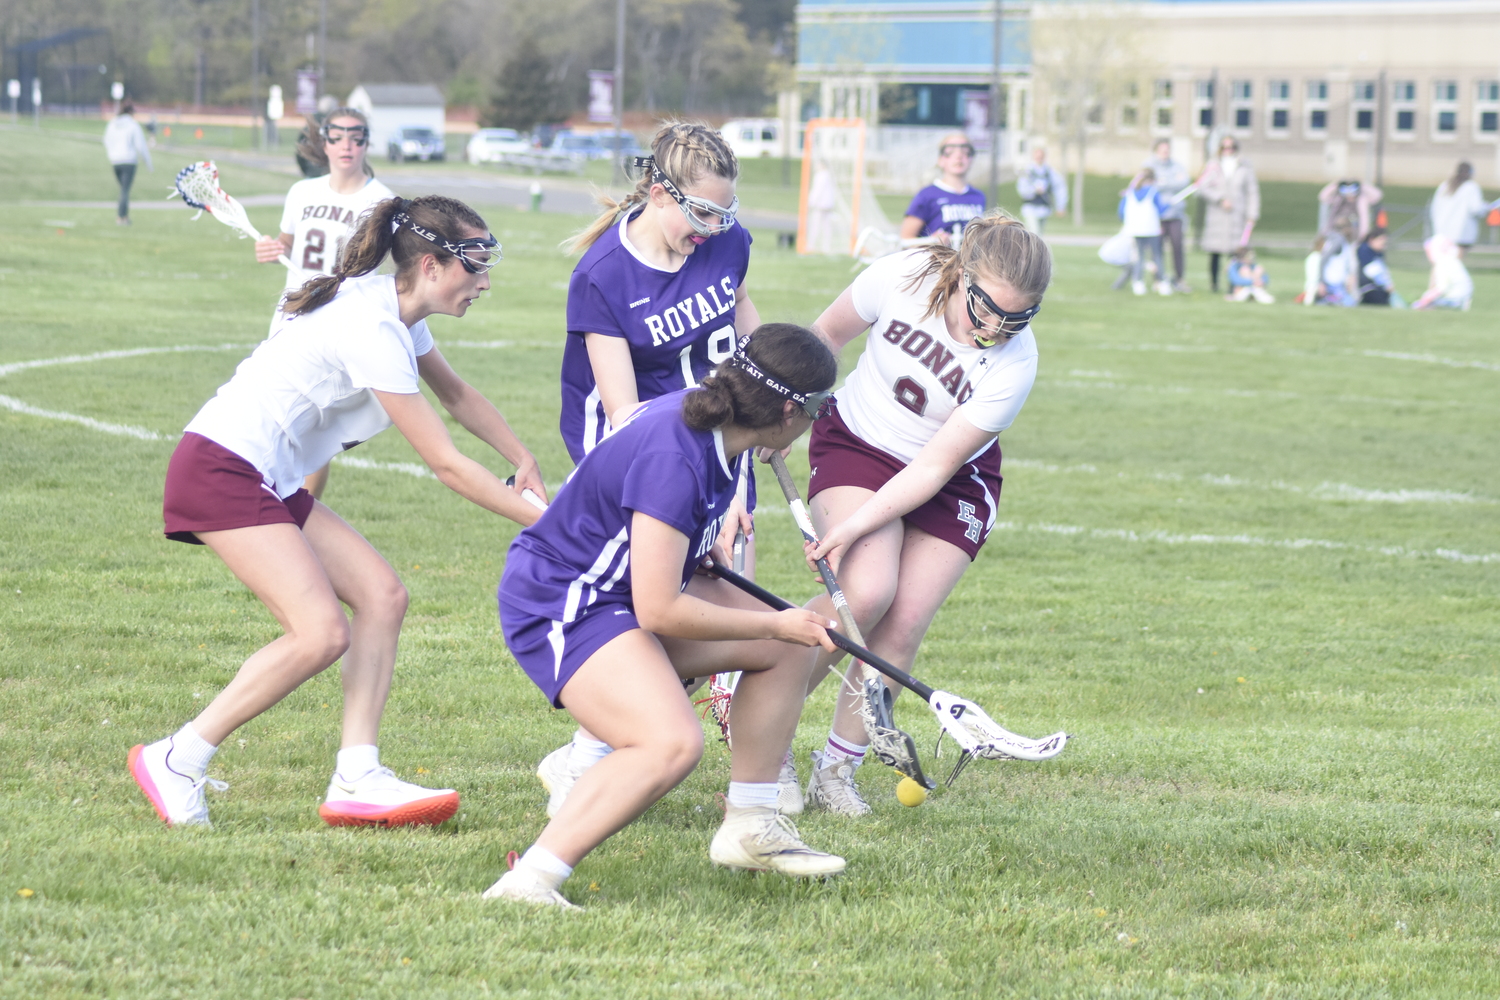 East Hampton senior Claire McGovern goes to scoop up a ground ball after sophomore teammate Ava Tintle caused the turnover.   DREW BUDD